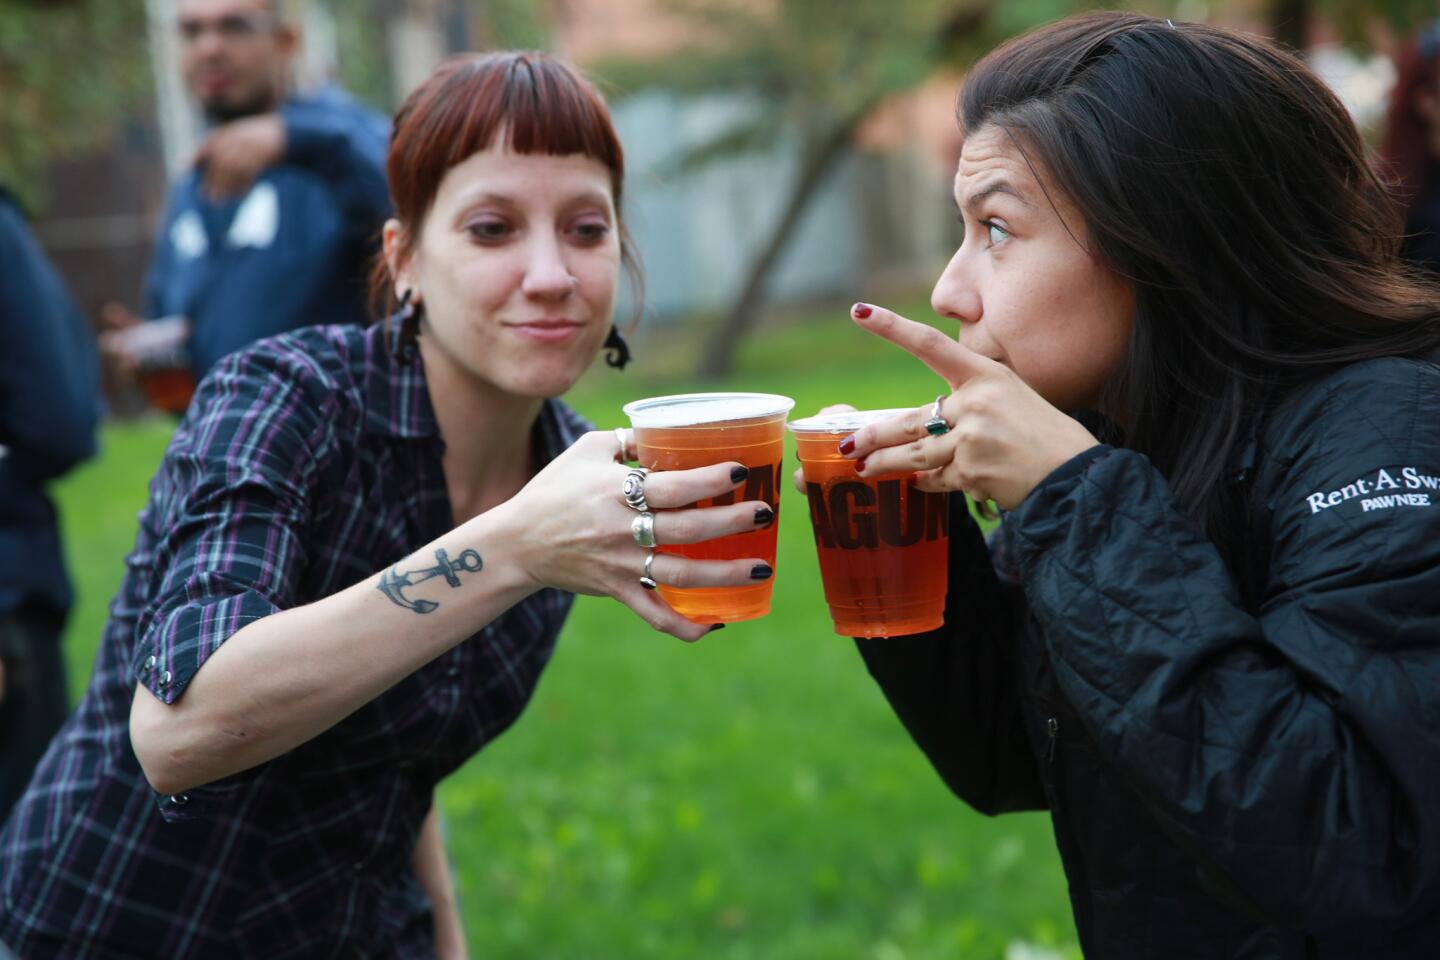 K.L. Kenzie, left, and Maegen Cadena toast each other as the Lagunitas Brewing Company prepared a Happy Hour gathering on Oct. 11. Brewing company officials worry that the shutdown may delay its seasonal beers.